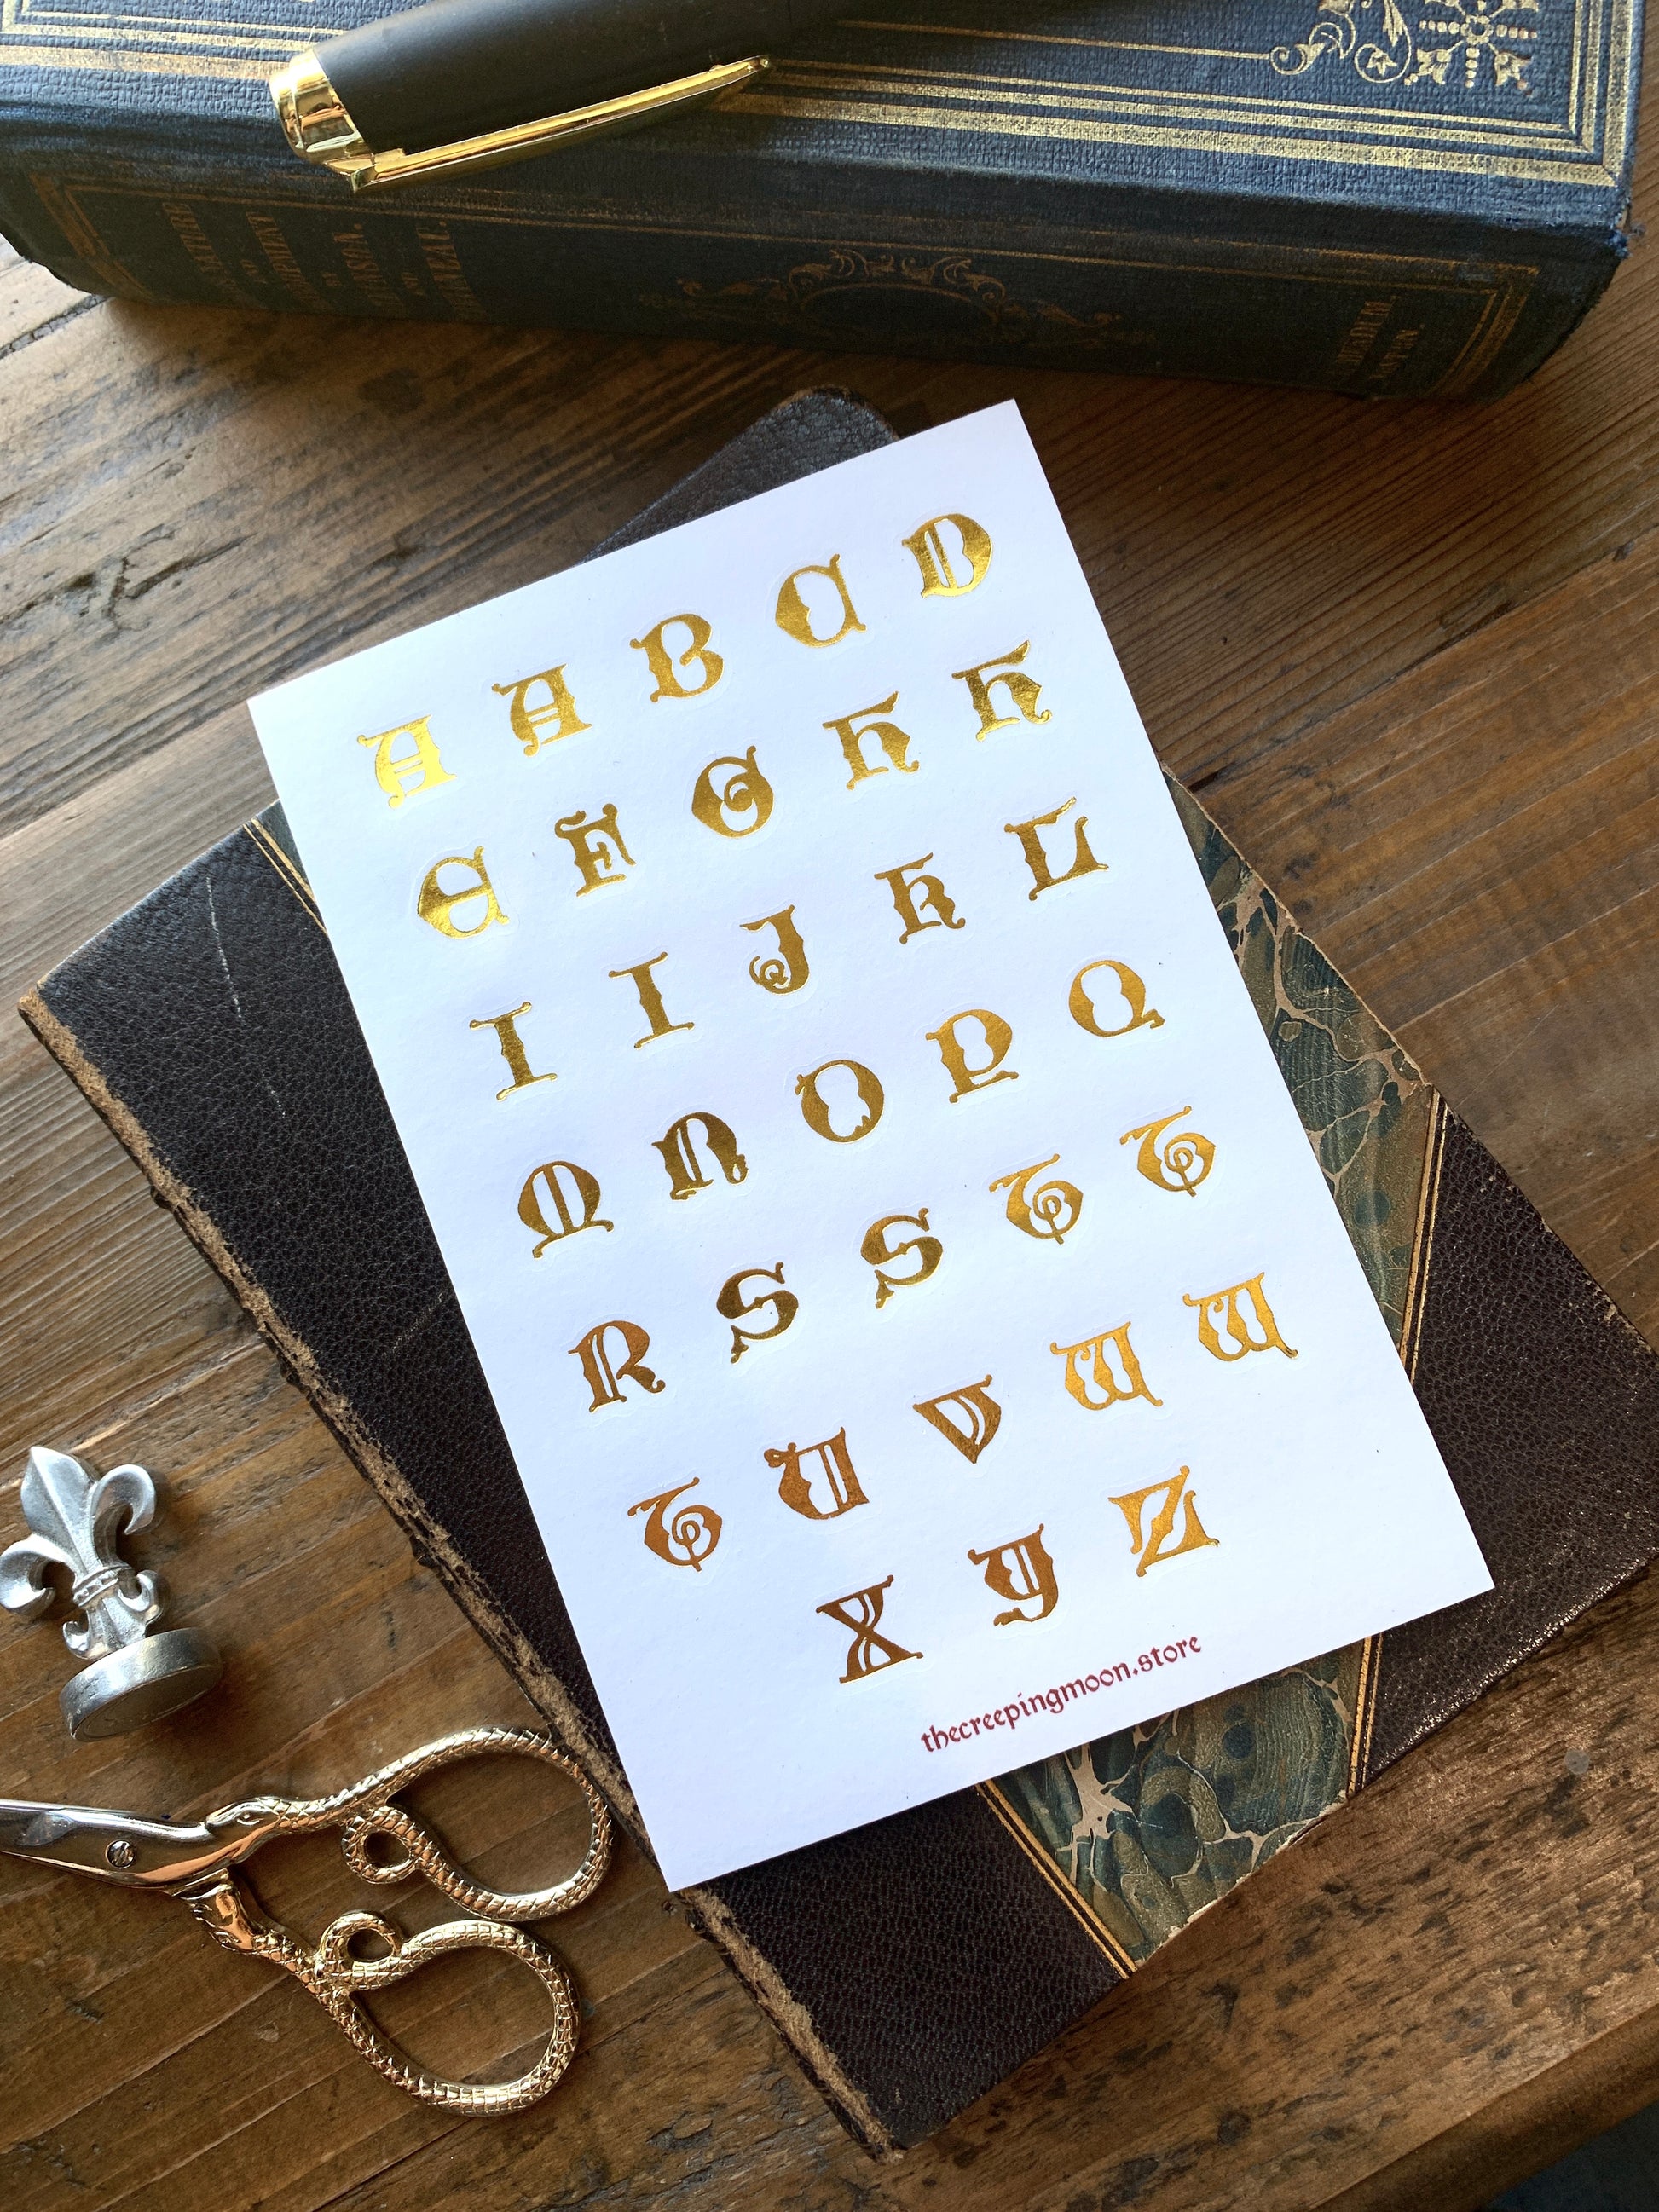 Gold Letter Stickers 